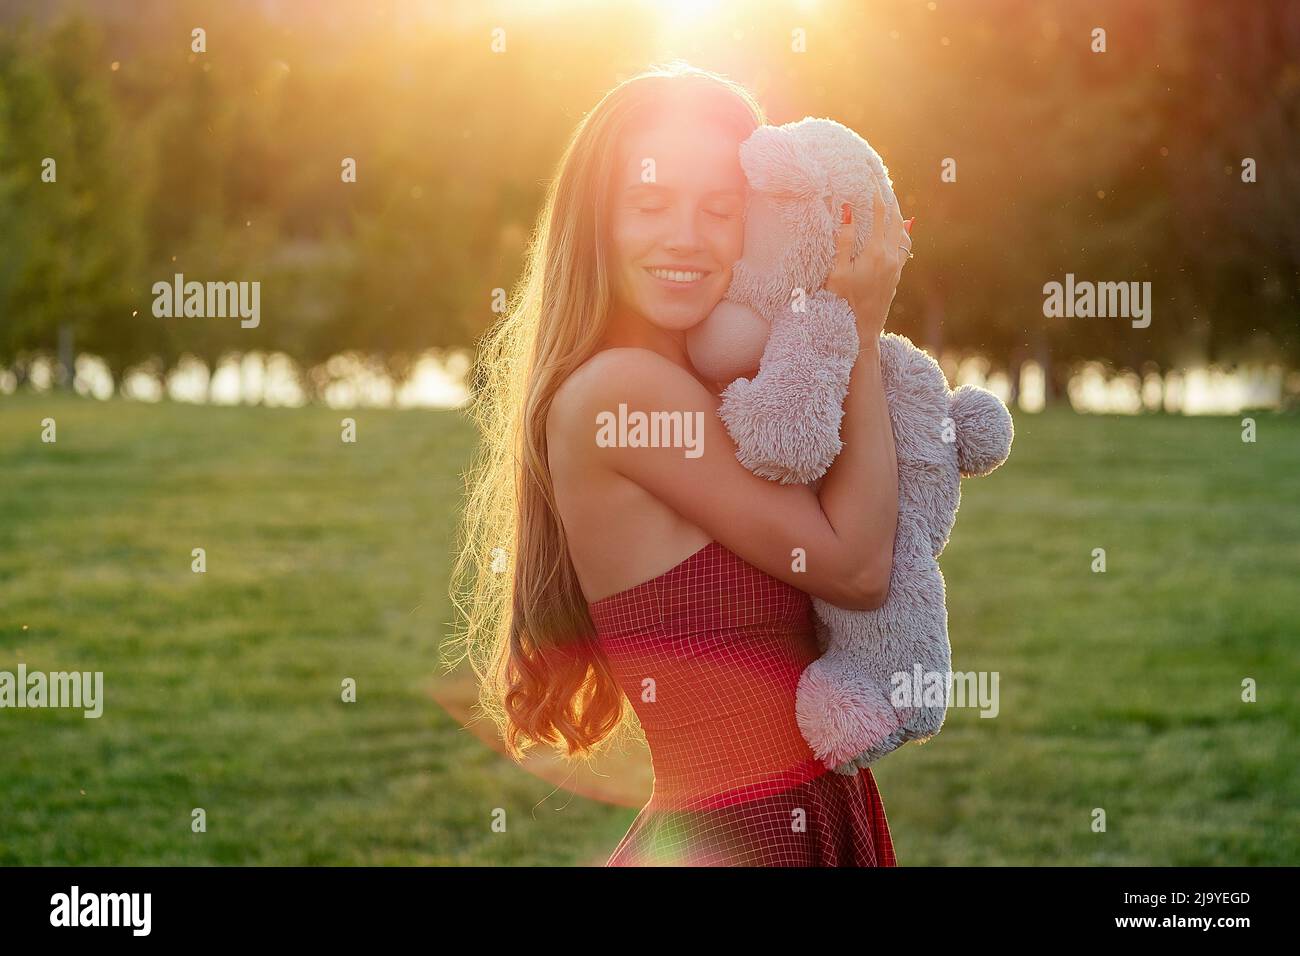 cute long-haired tanned woman enigmatic smile in a red dress holding a gray teddy bear toy in hands in the park trees background Stock Photo